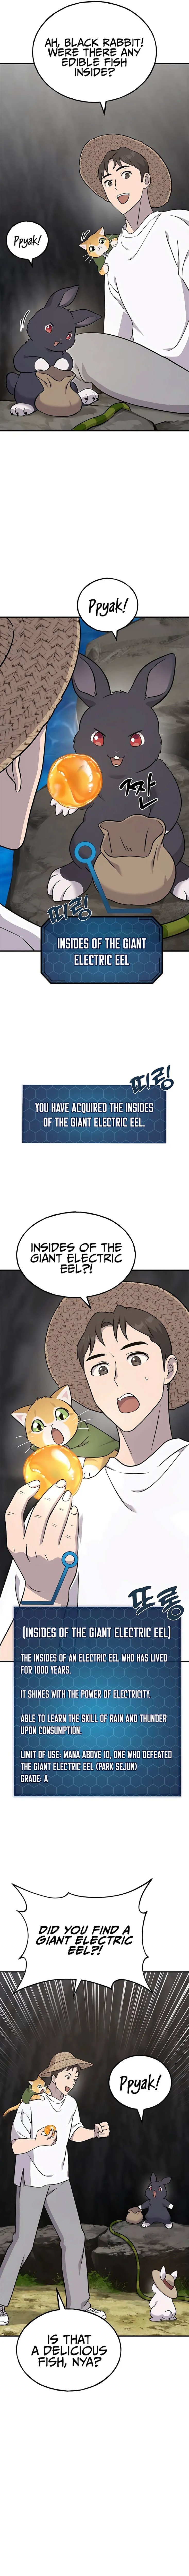 Solo Farming In The Tower Chapter 51 page 4